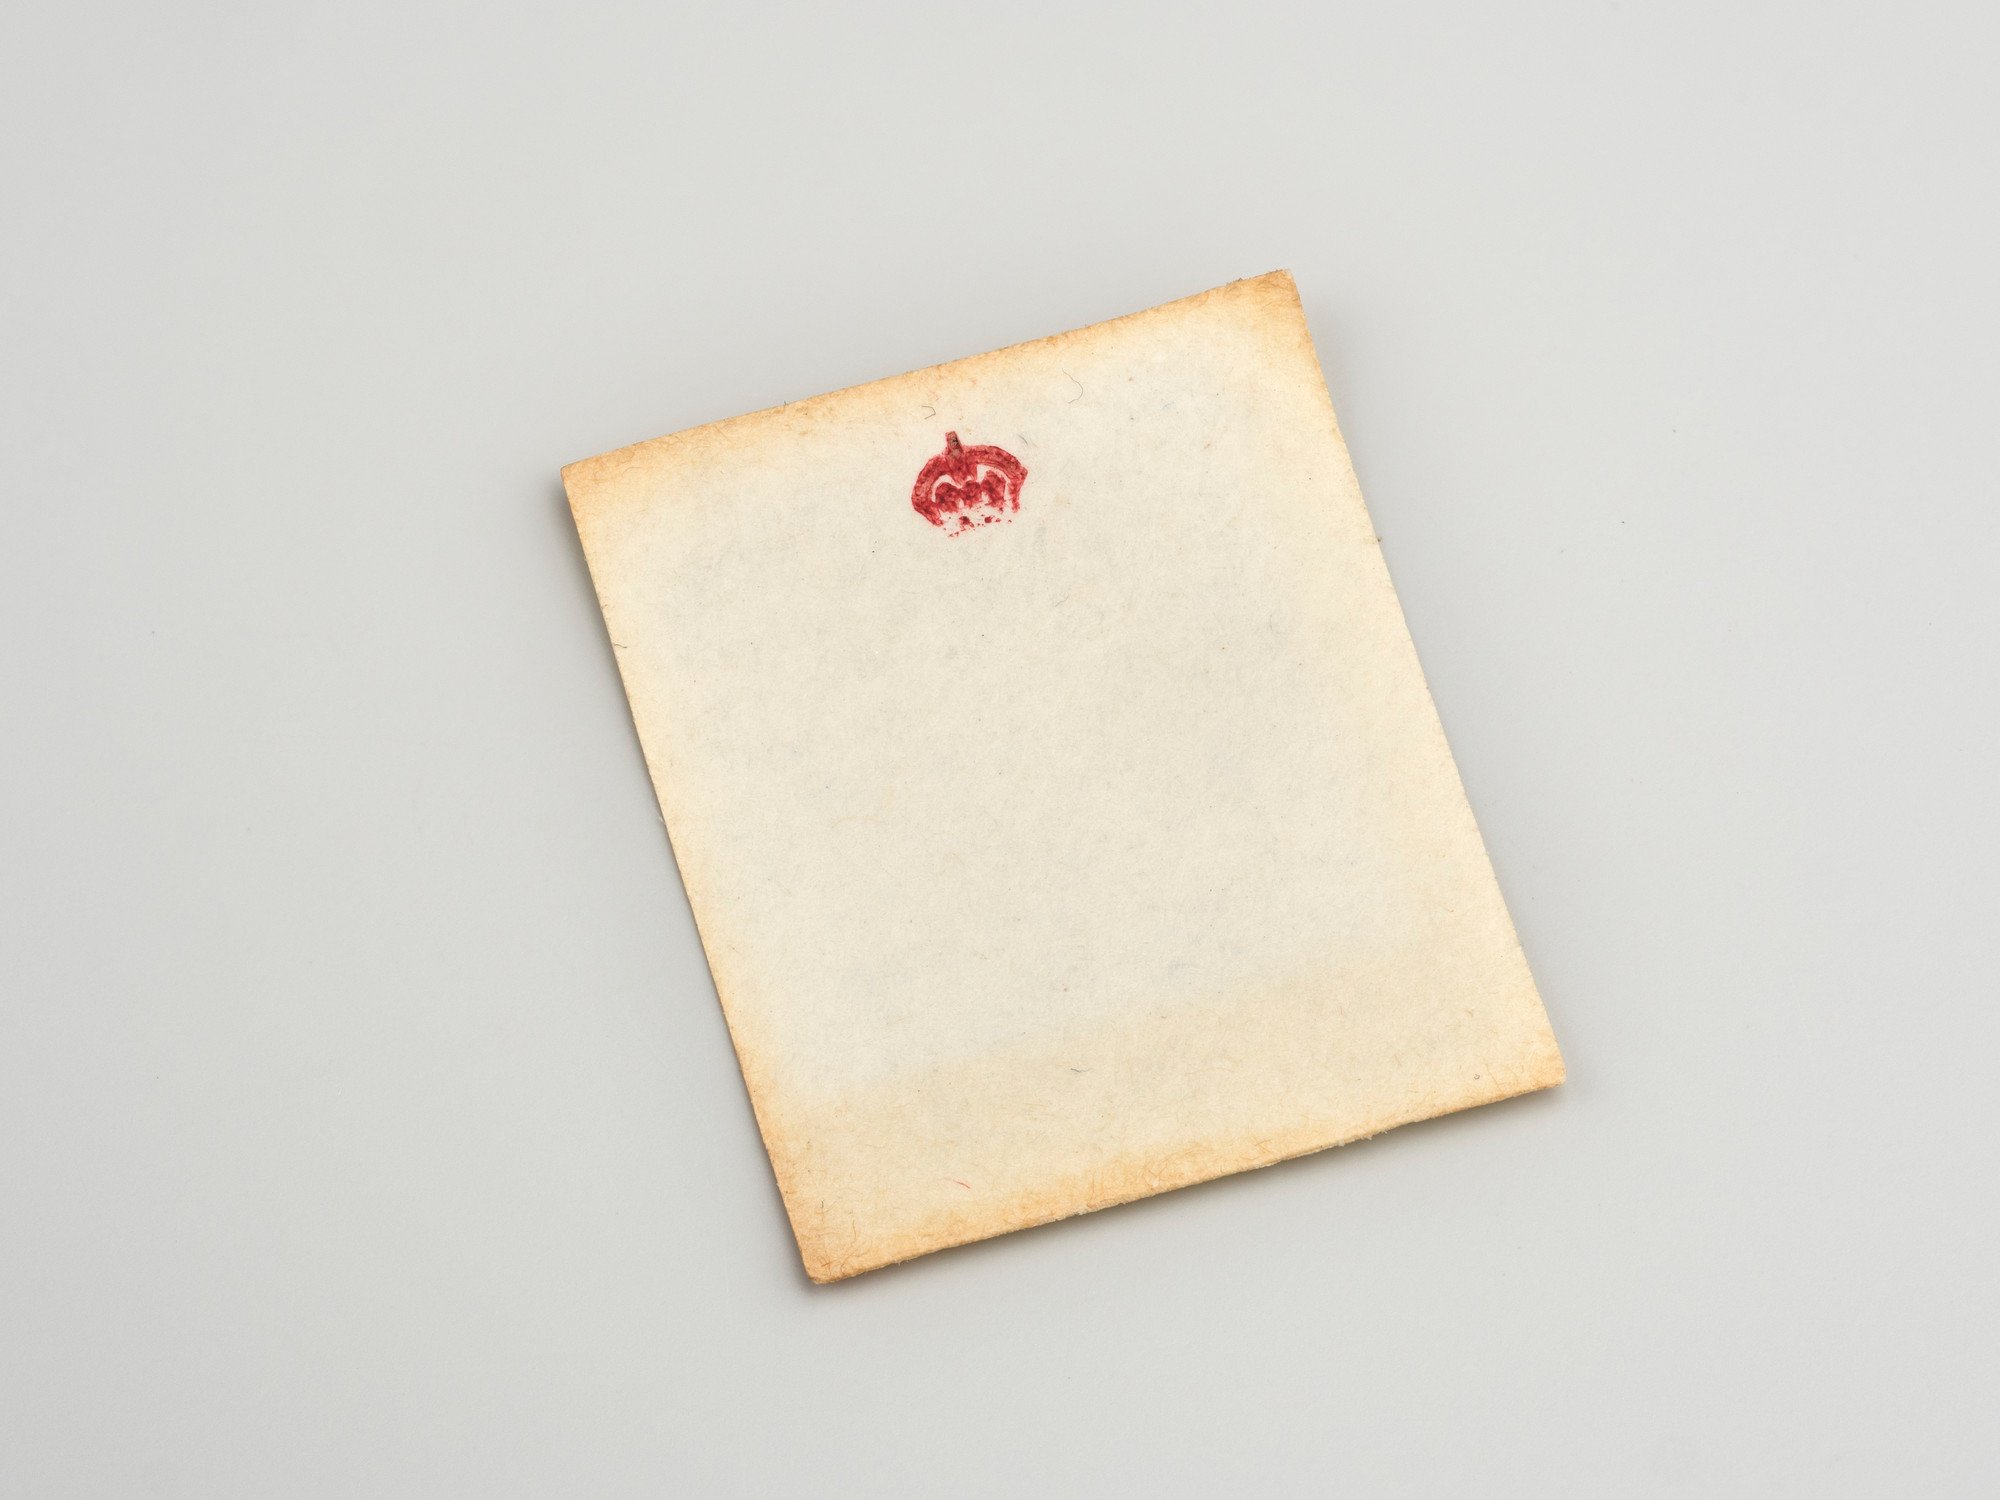 Miniature writing paper with crowned M monogram in red.